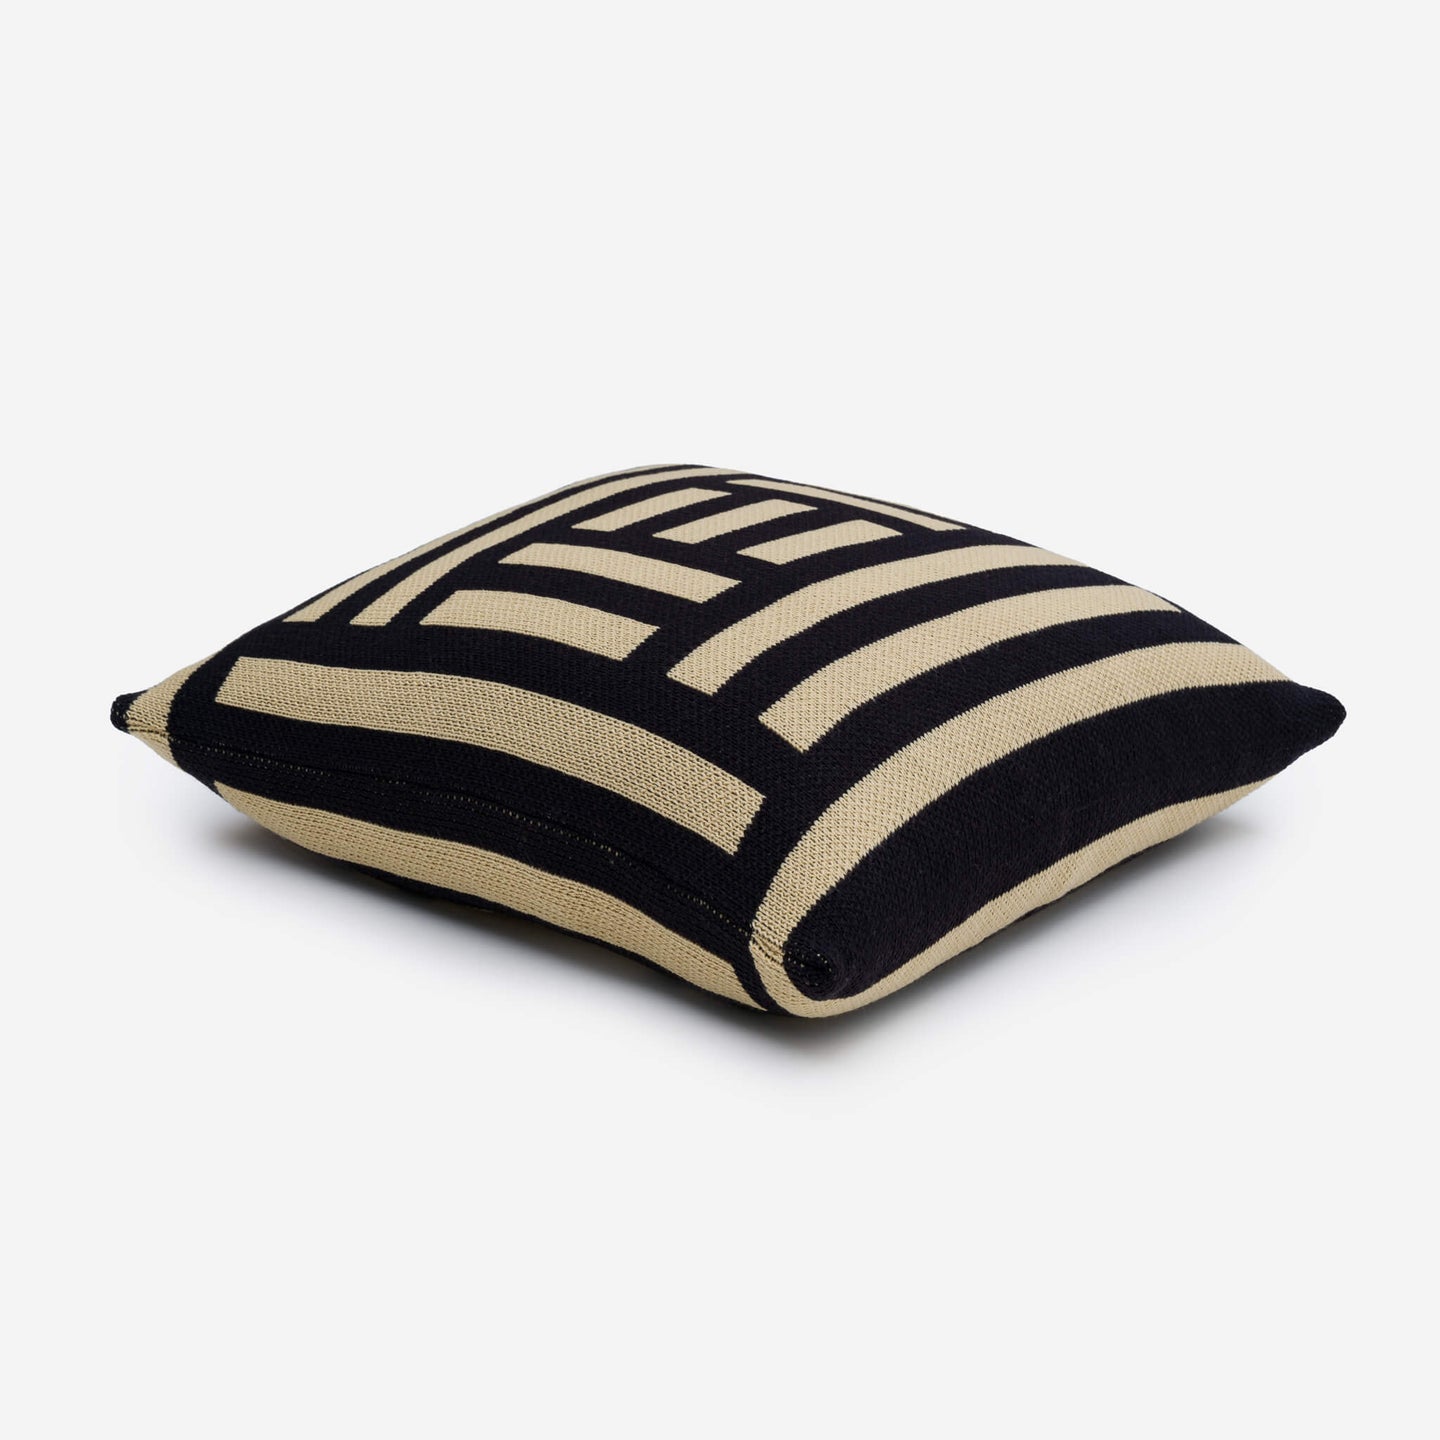 Columns Pillow Cover Reversible Bold Graphic